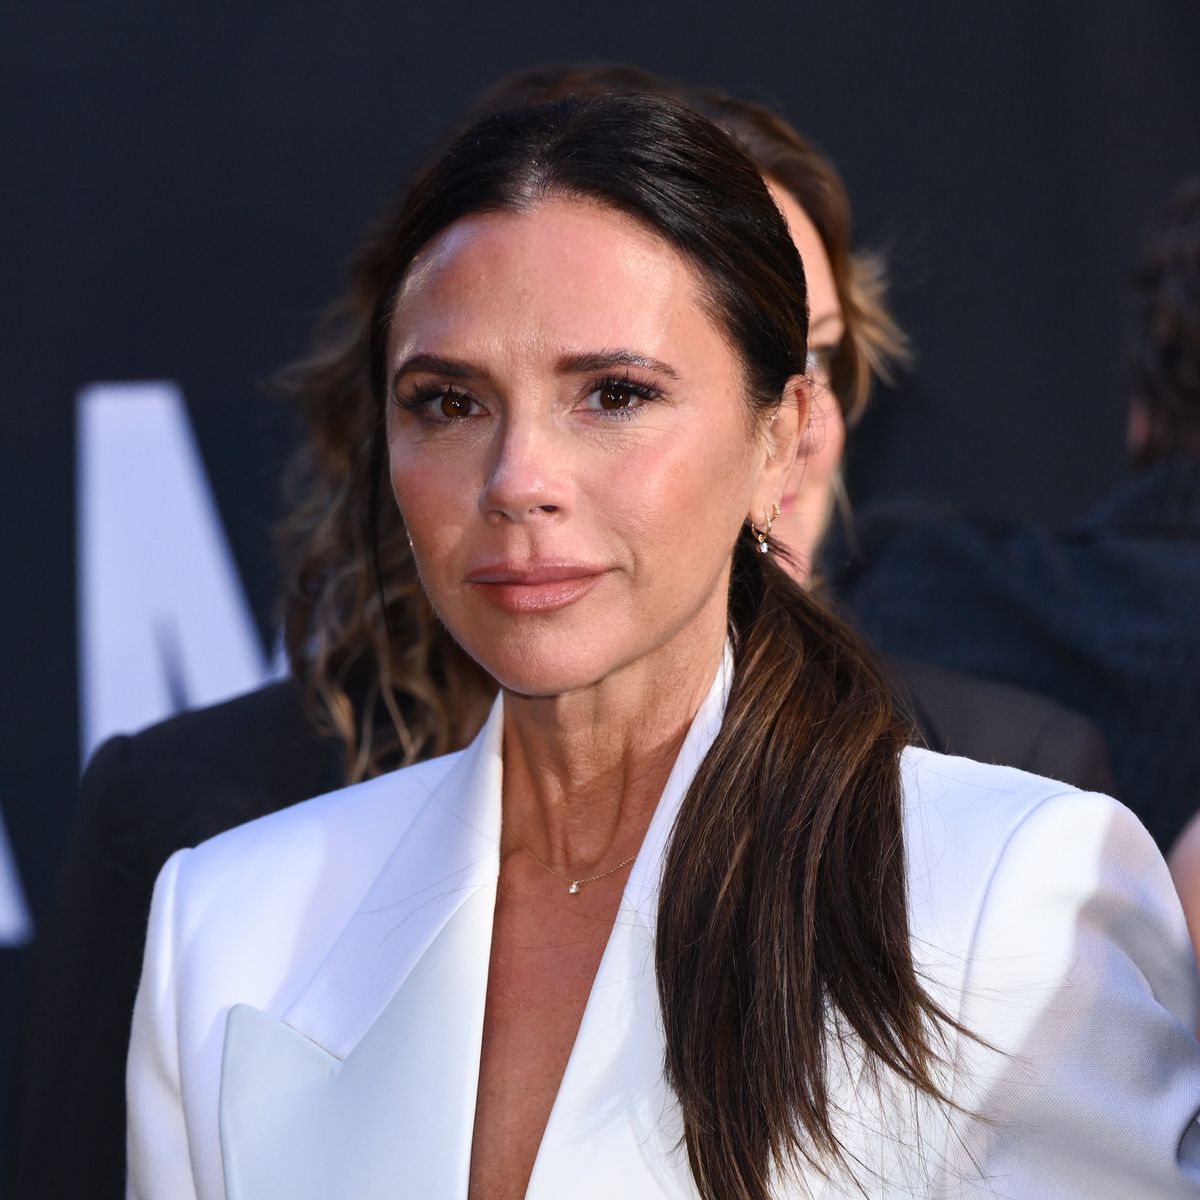 Why do celebs like Victoria Beckham pretend they're working class?